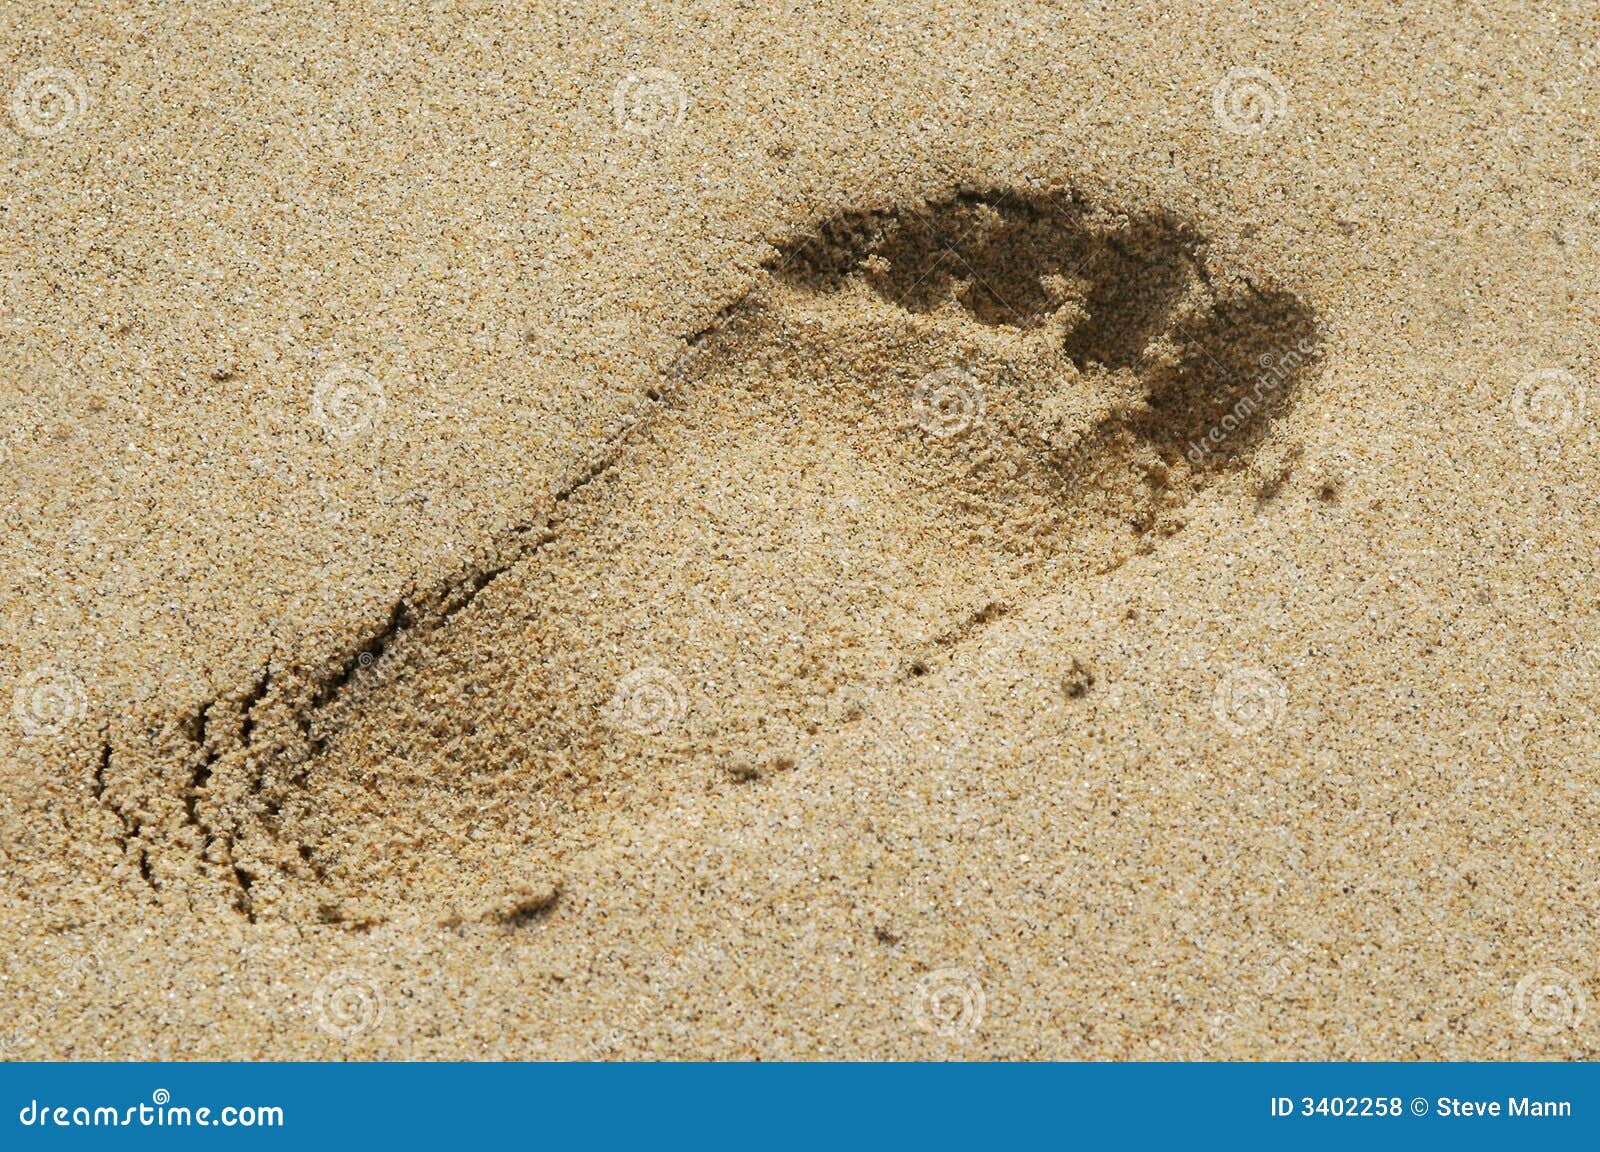 Footstep stock photo. Image of grains, beaches, resort - 3402258